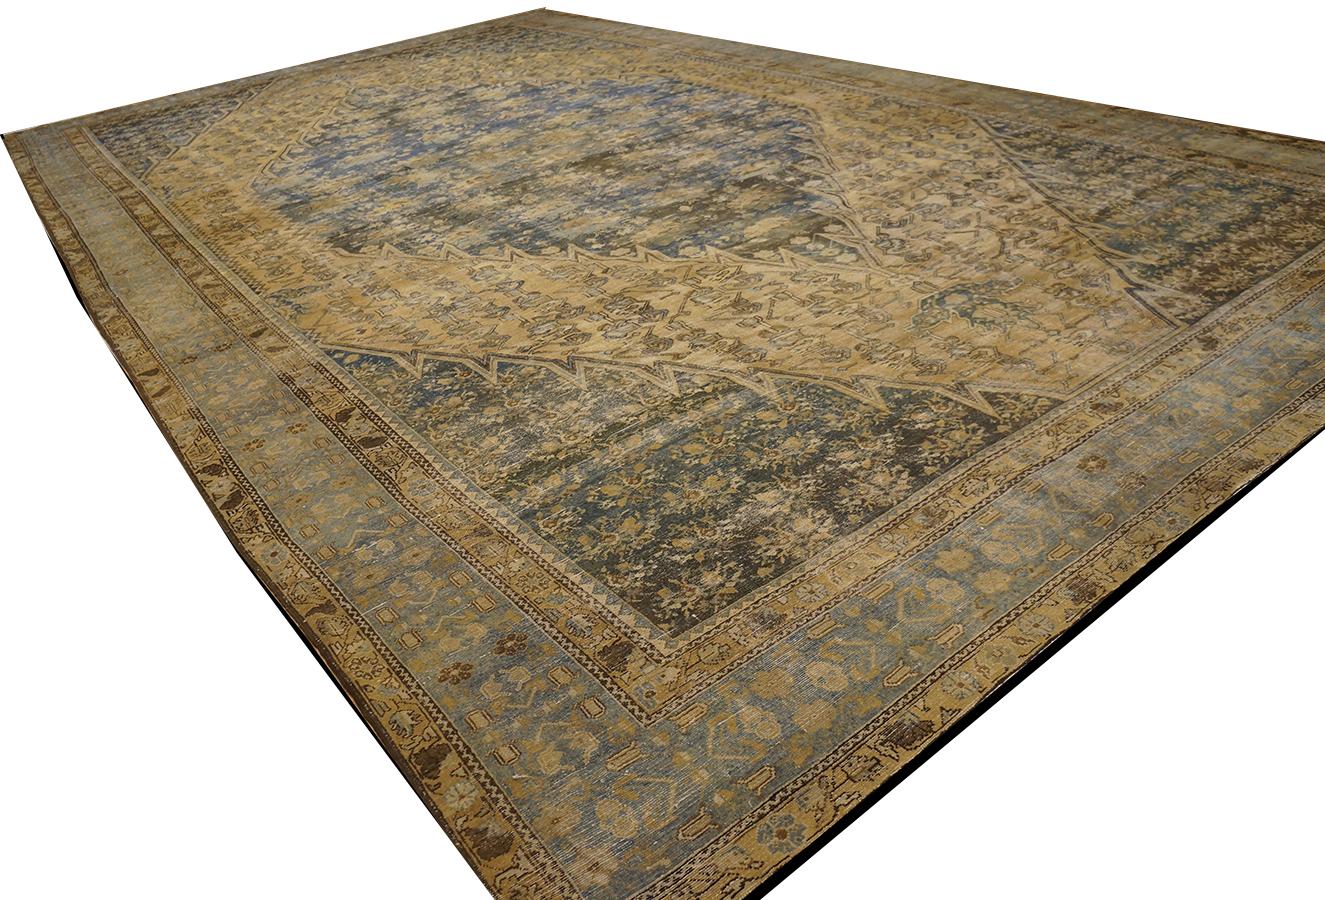 Hand-Knotted Early 20th Century Persian Malayer Carpet ( 12'3'' x 21'2'' - 373 x 645 ) For Sale